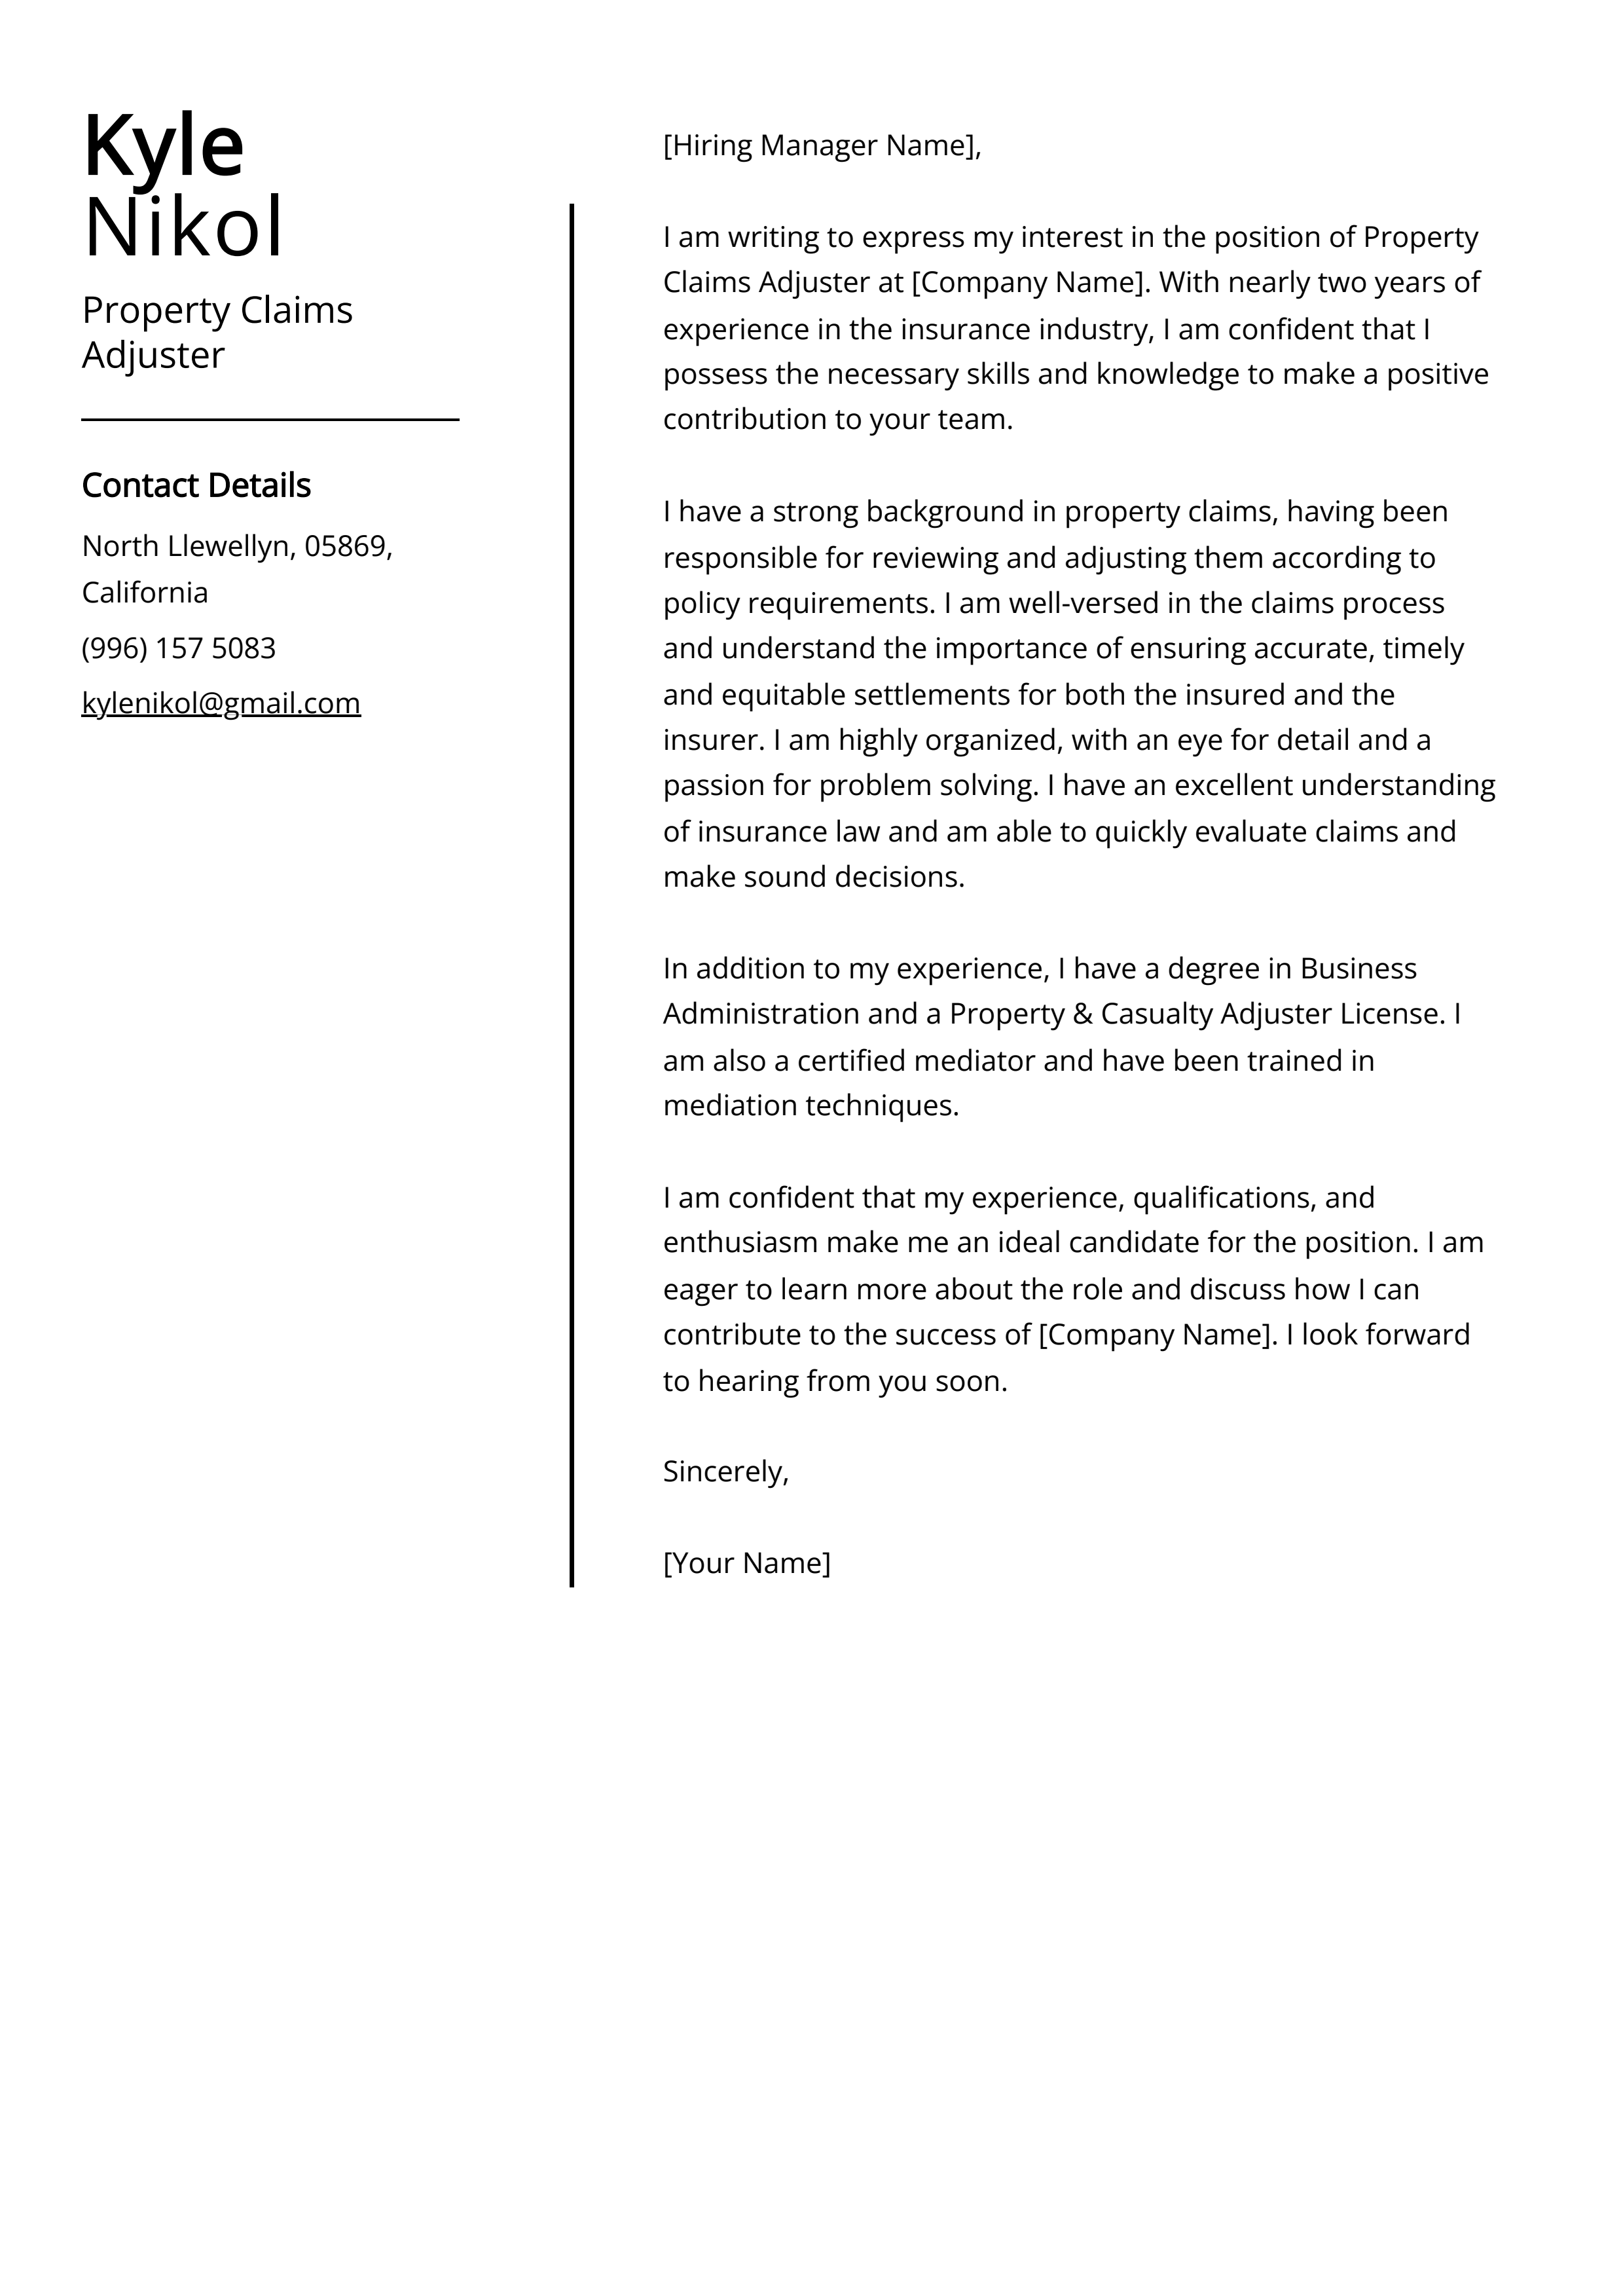 Property Claims Adjuster Cover Letter Example